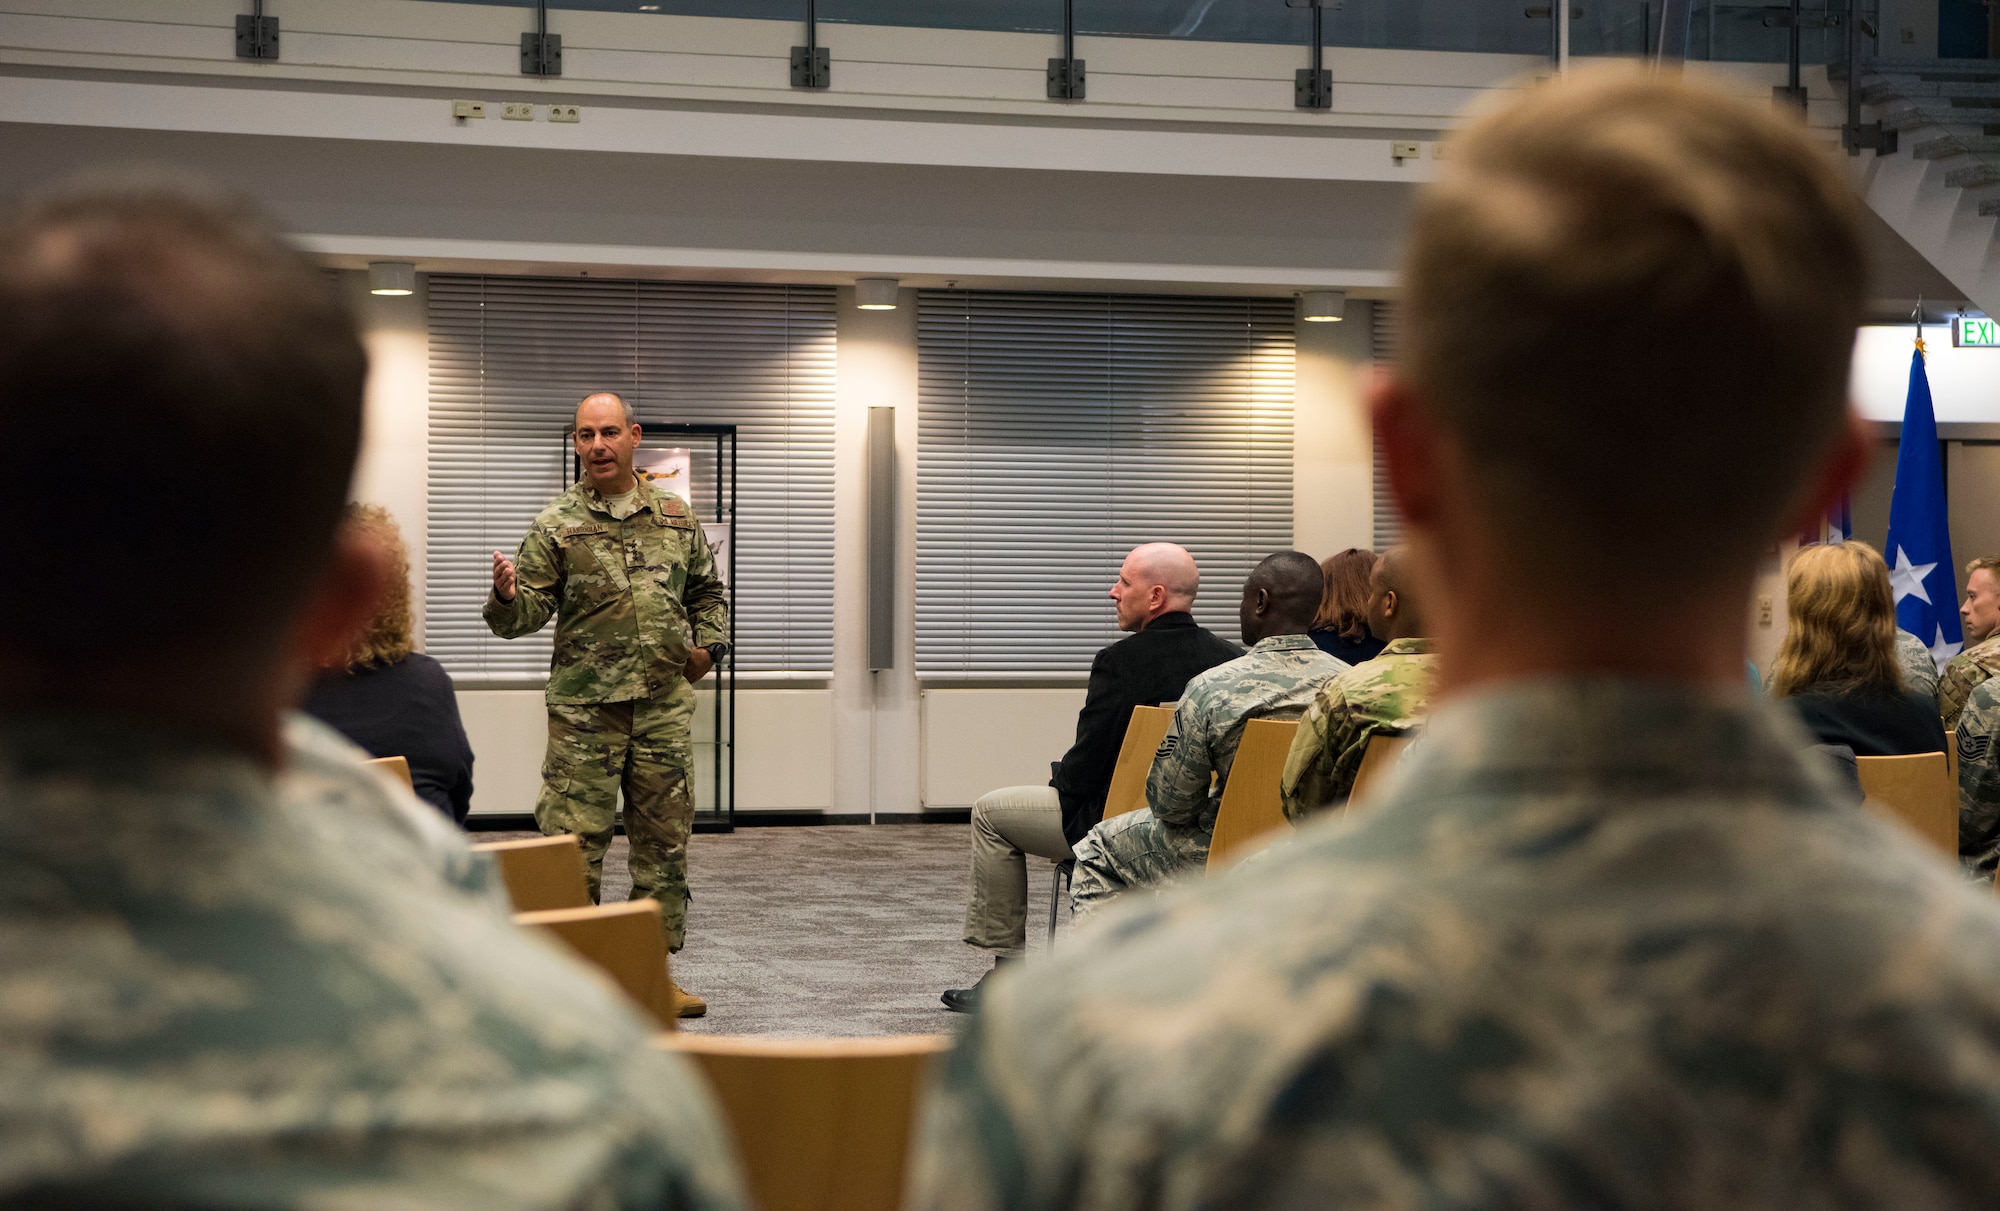 Lt. Gen. Jeffrey L. Harrigian, U.S. Air Forces in Europe and Air Forces Africa deputy commander, speaks 
to U.S. Airmen contracting professionals assigned across five different contracting organizations throughout the Kaiserslautern Military Community on Ramstein Air Base, Germany, Oct. 19, 2018. The command is supported by over 350 contracting professionals, located throughout Europe and Africa, and is comprised of officers, enlisted, U.S. government civil service members, and Local National employees.